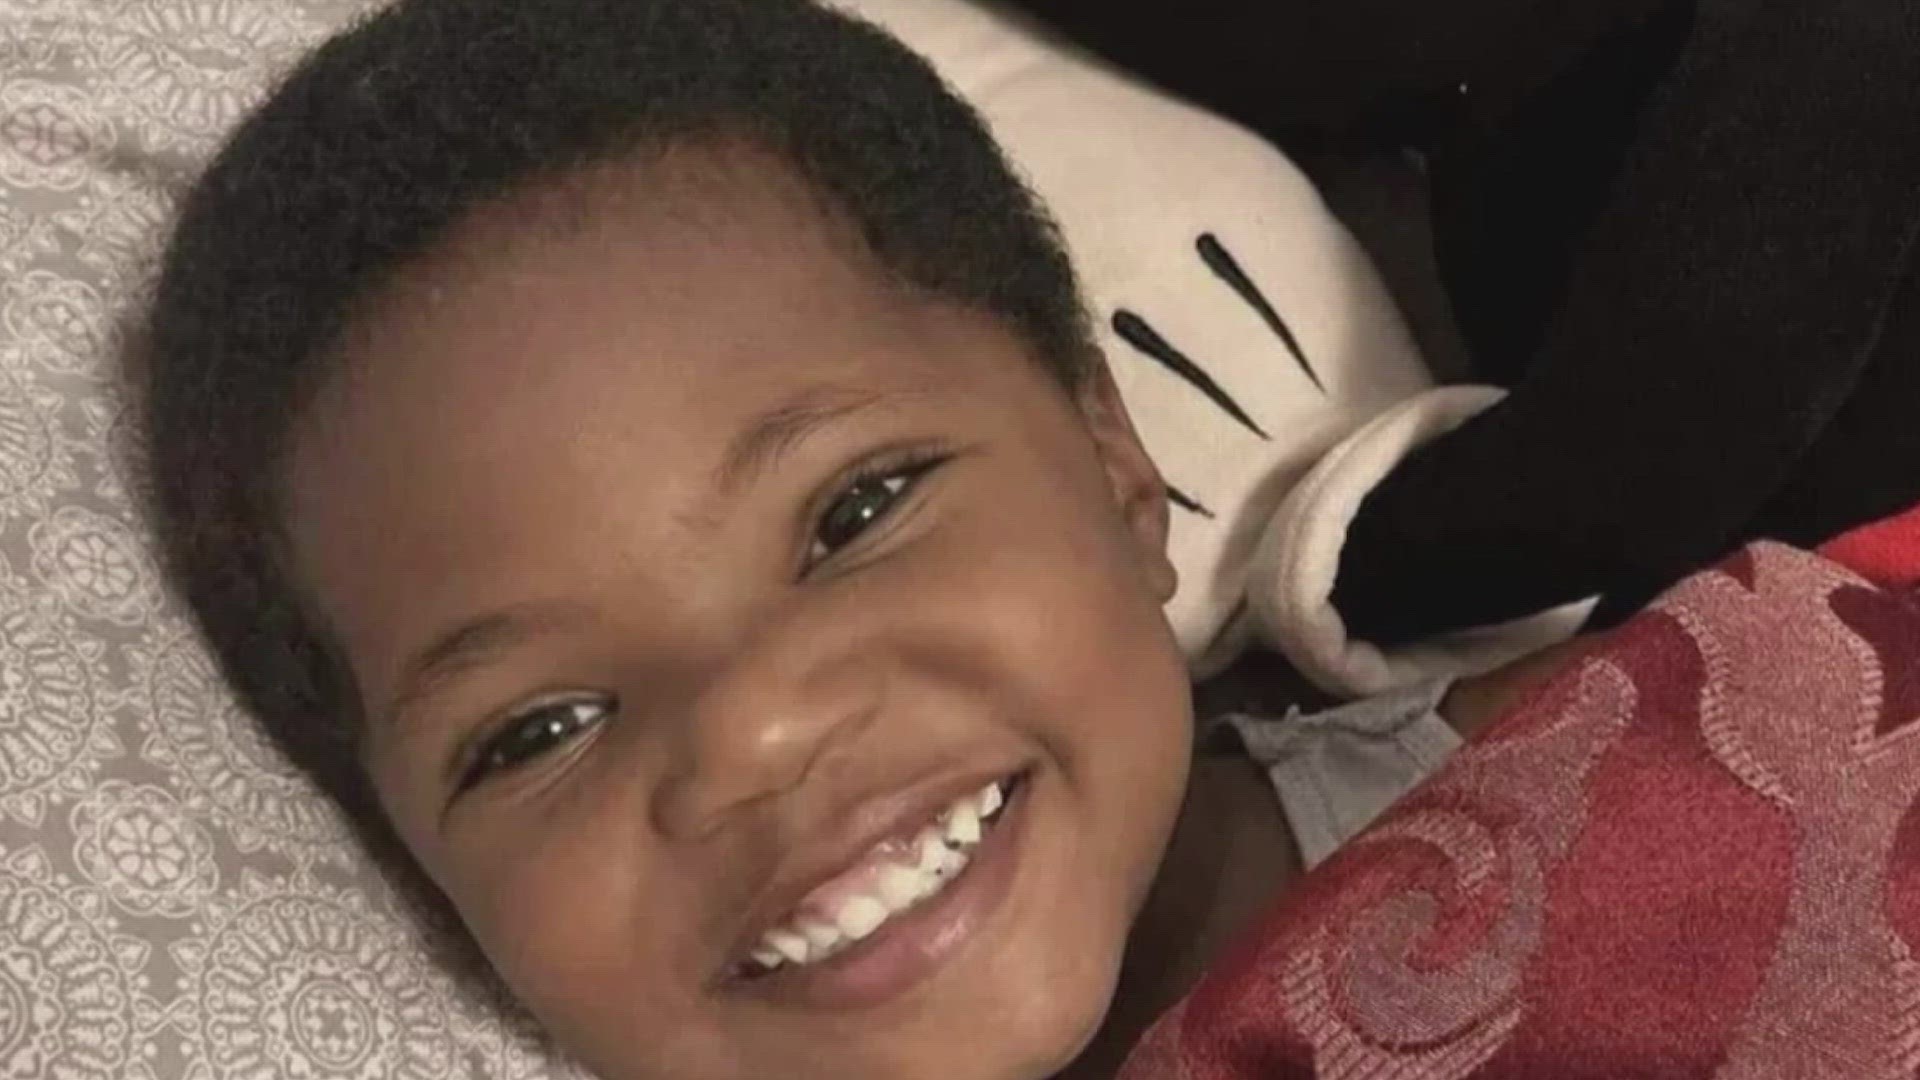 Pammy Maye had legal custody over 5-year-old Darnell Taylor, whose body has now been recovered in Franklin County.